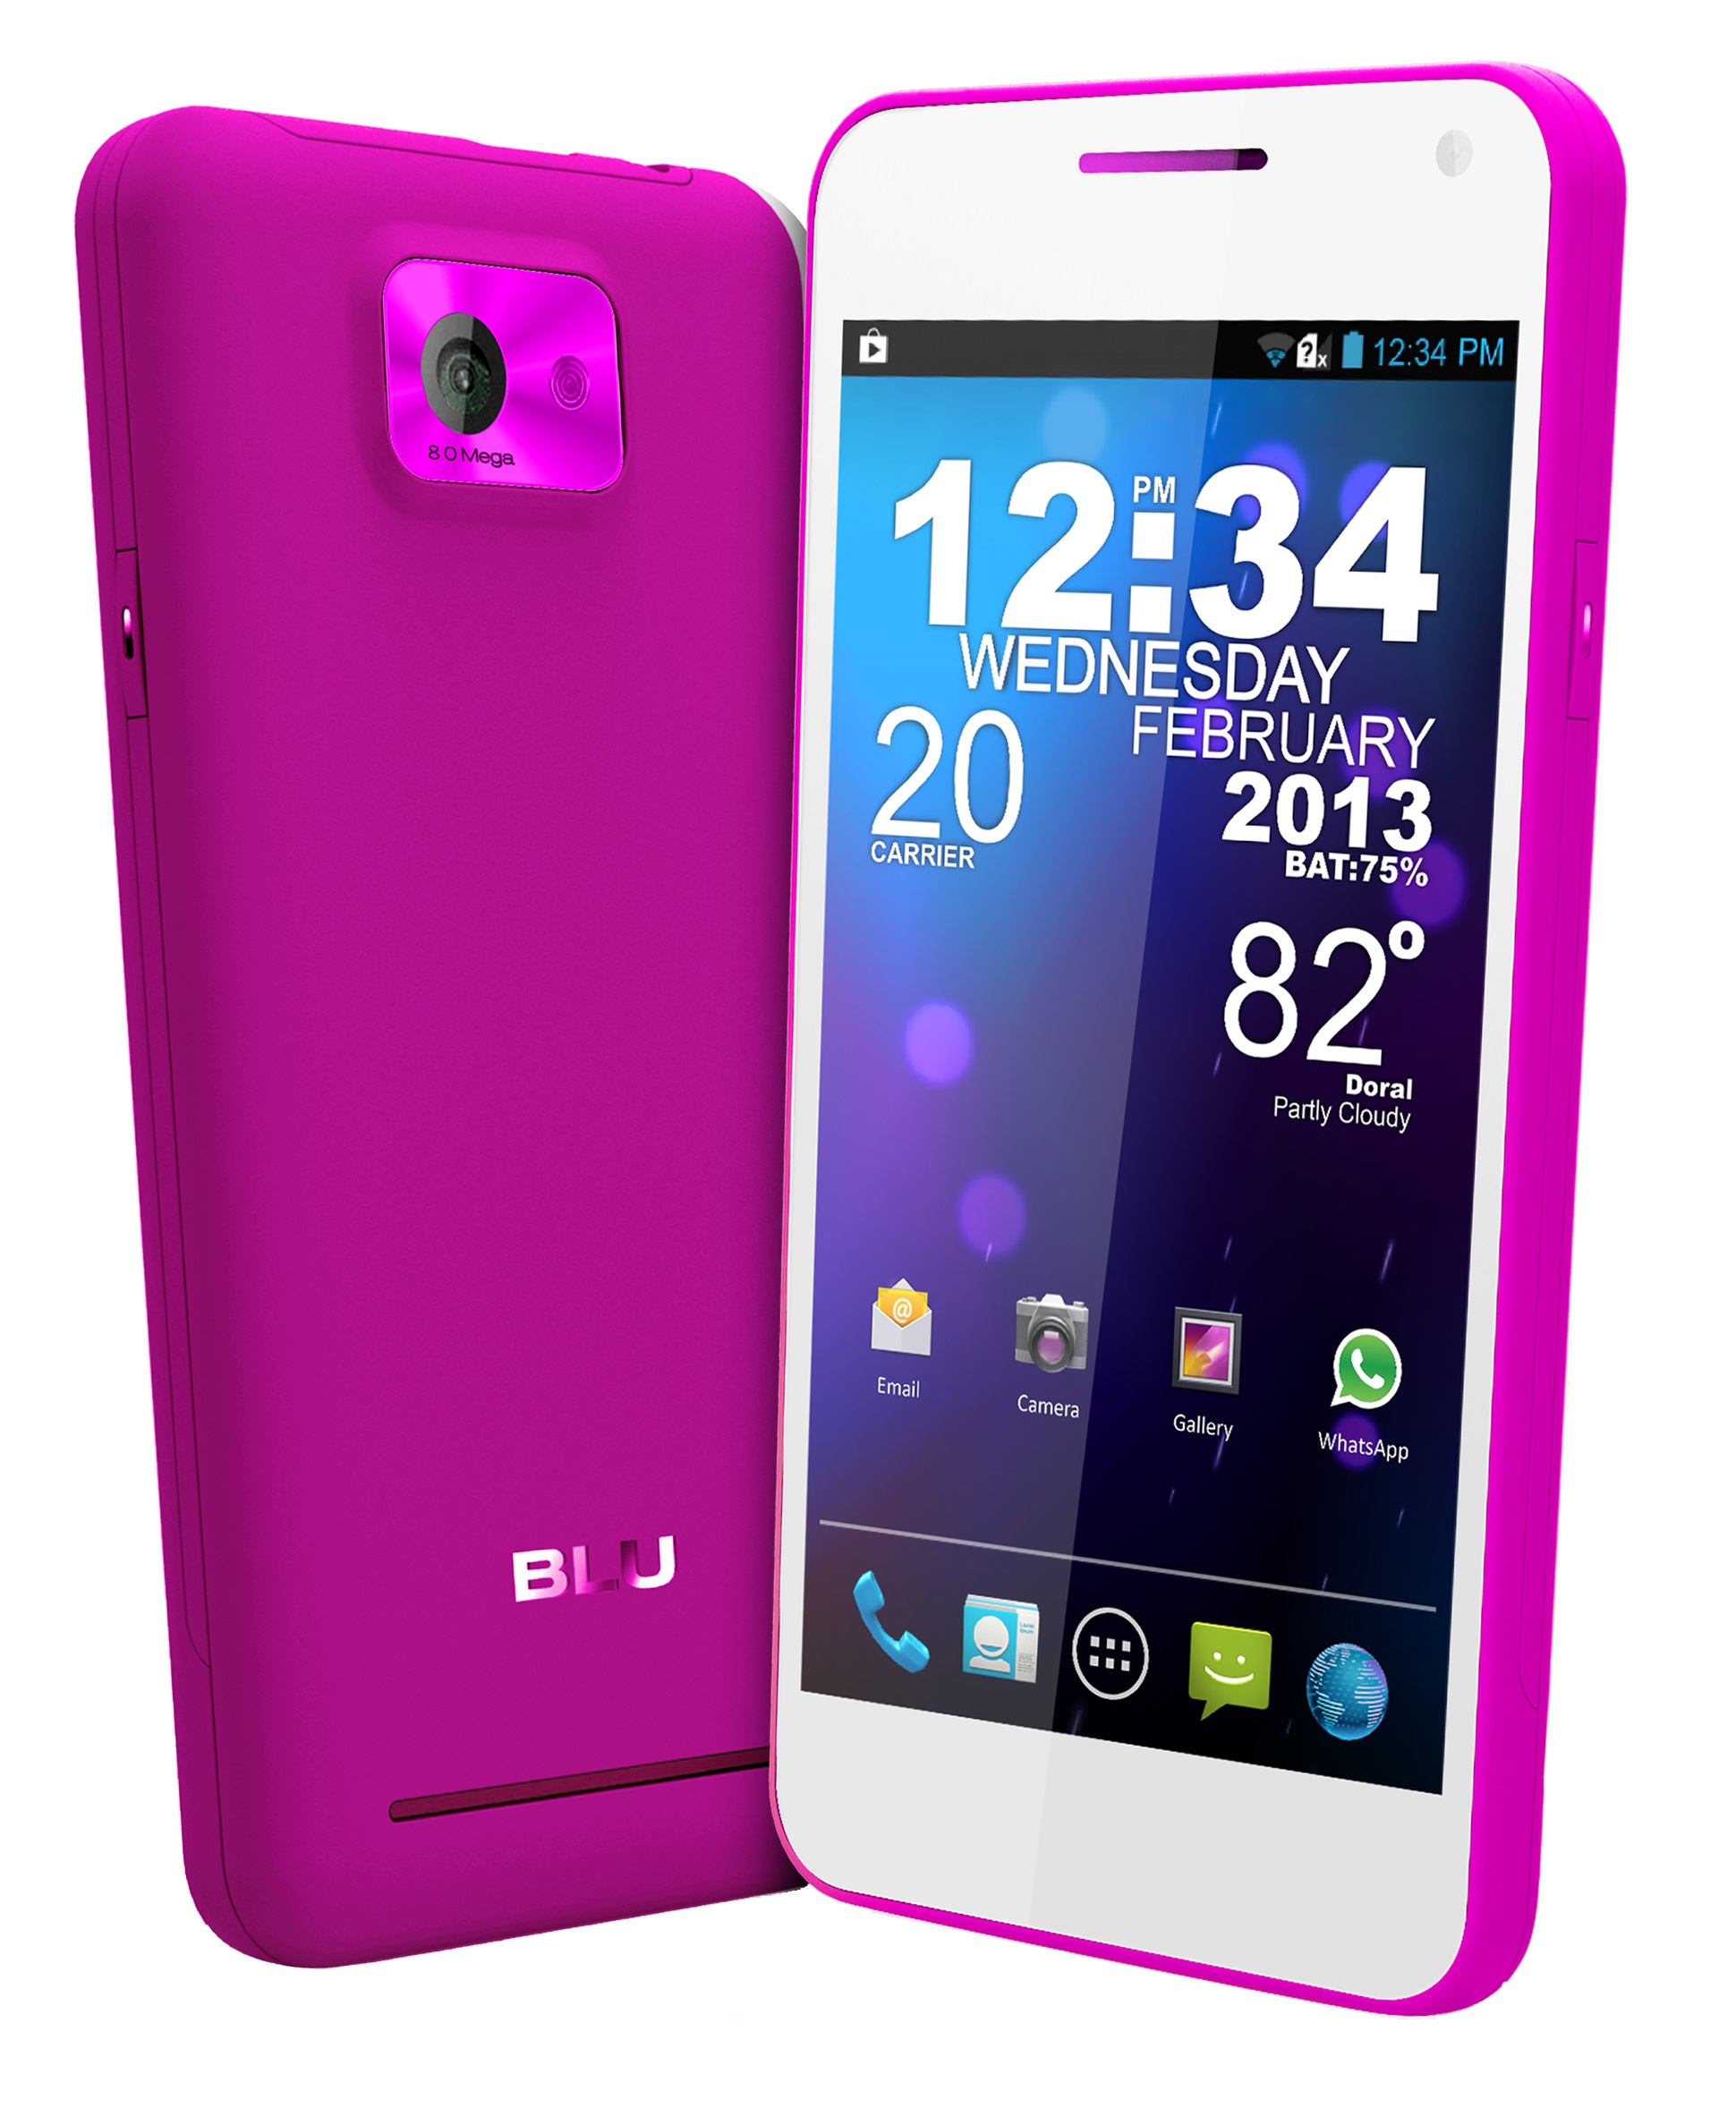 New Blu Vivo 4 3 D910A Unlocked GSM Dual Sim Android Cell Phone Pink